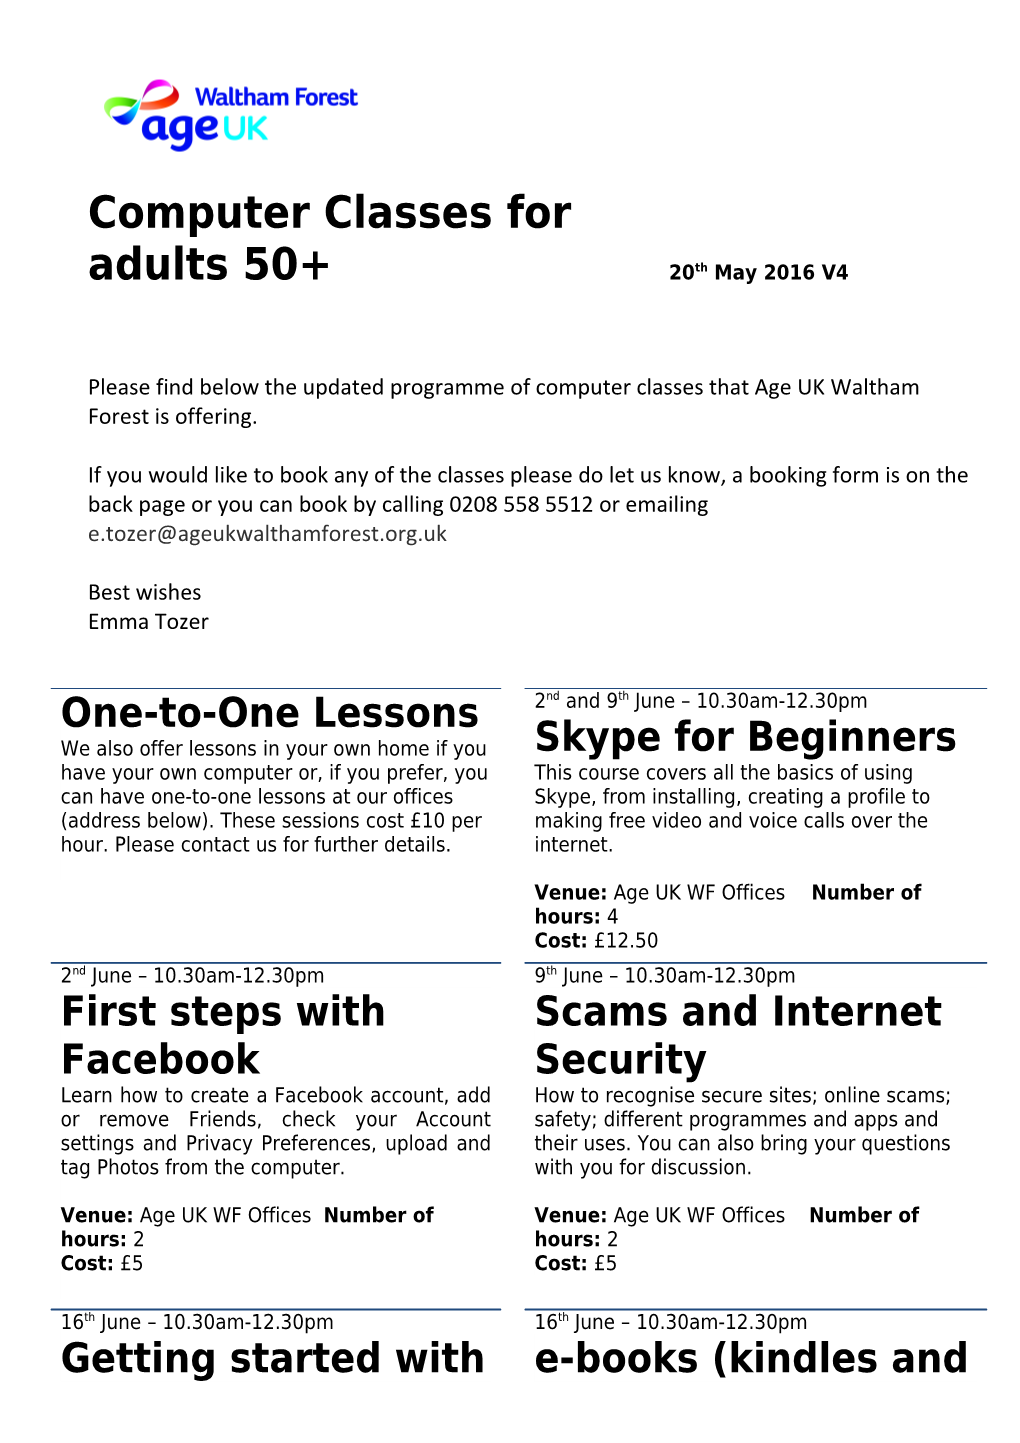 Please Find Below the Updated Programme of Computer Classes That Age UK Waltham Forest